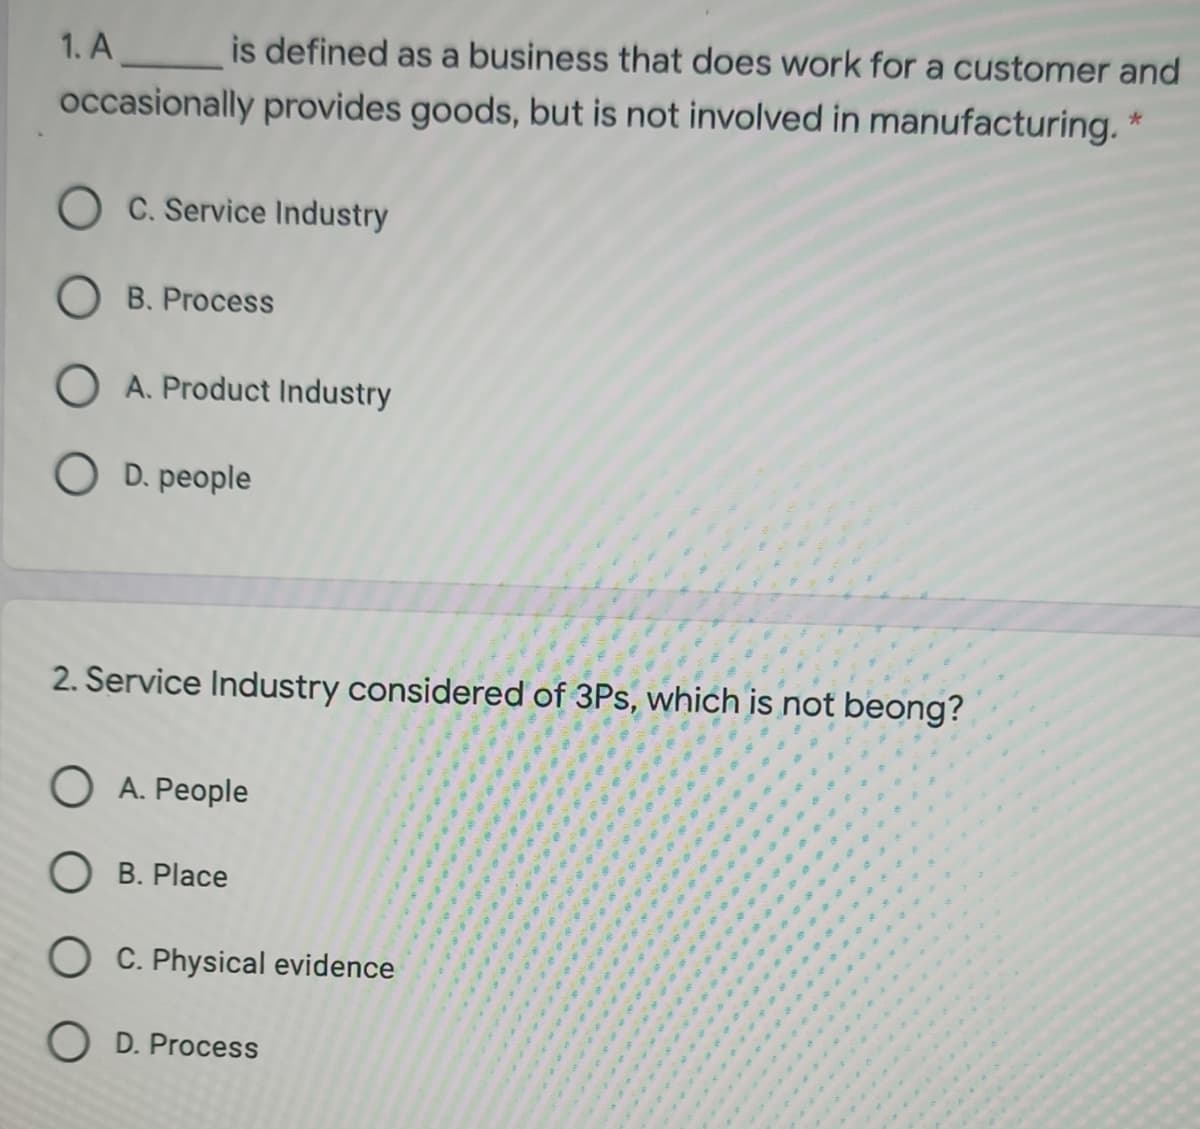 1. A is defined as a business that does work for a customer and
occasionally provides goods, but is not involved in manufacturing. *
O C. Service Industry
O B. Process
O A. Product Industry
O D. people
2. Service Industry considered of 3Ps, which is not beong?
O A. People
O B. Place
O C. Physical evidence
O D. Process
